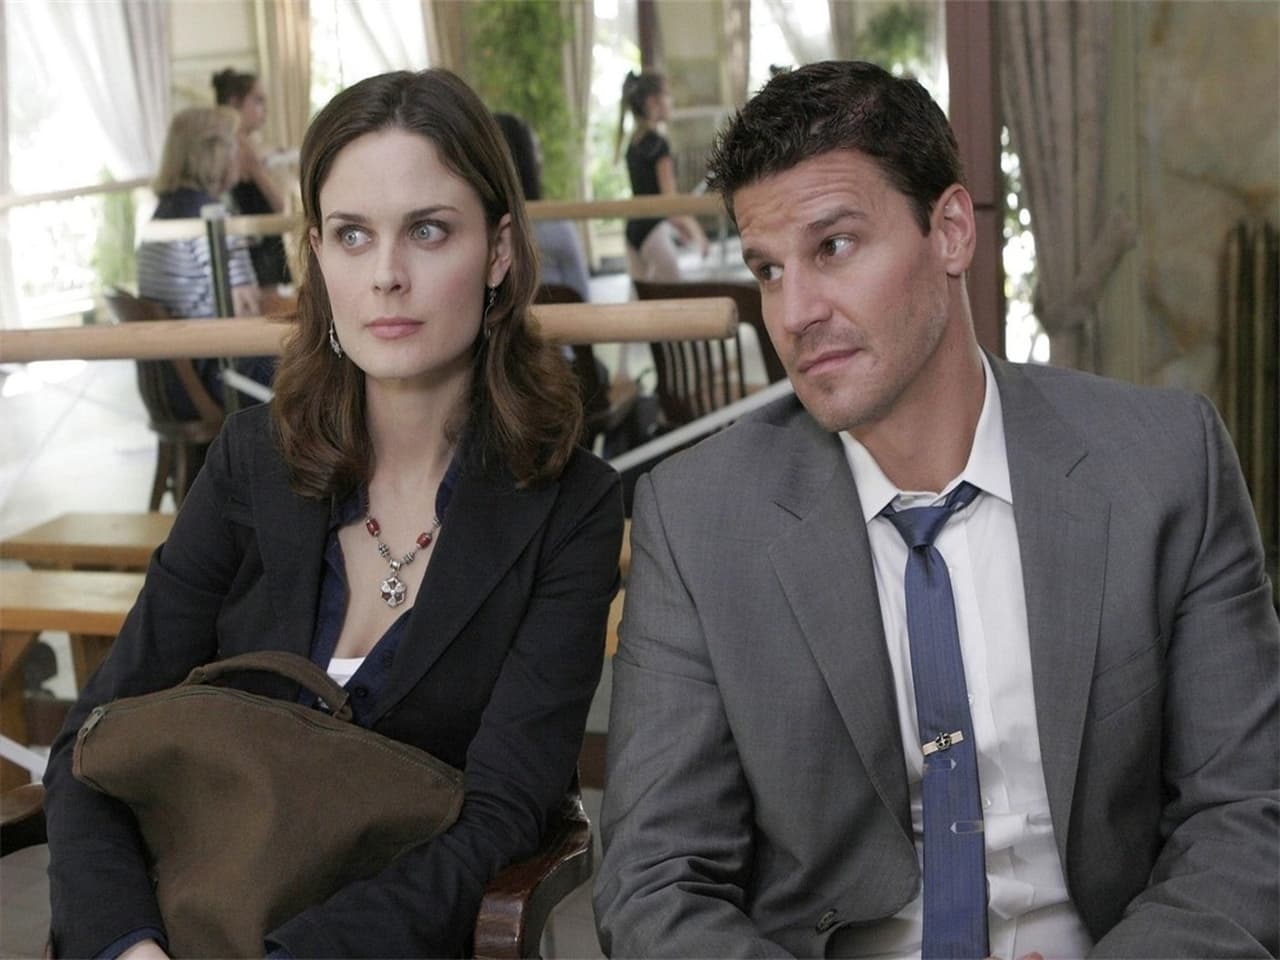 Bones - Season 2 Episode 7 : The Girl with the Curl